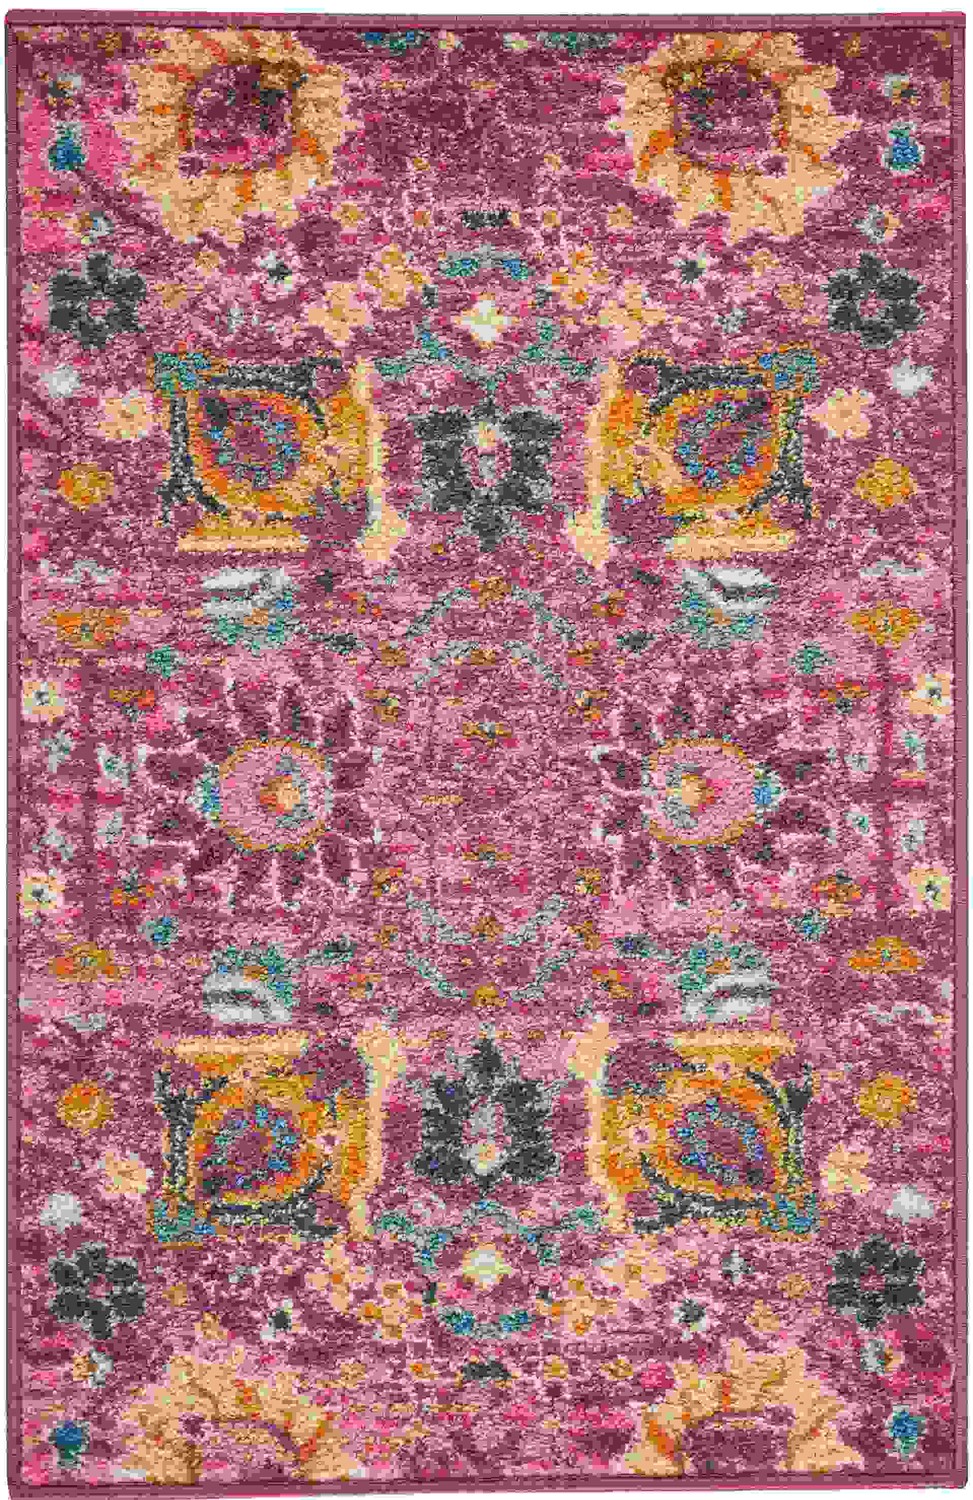 2 x 3 Fuchsia and Orange Distressed Scatter Rug